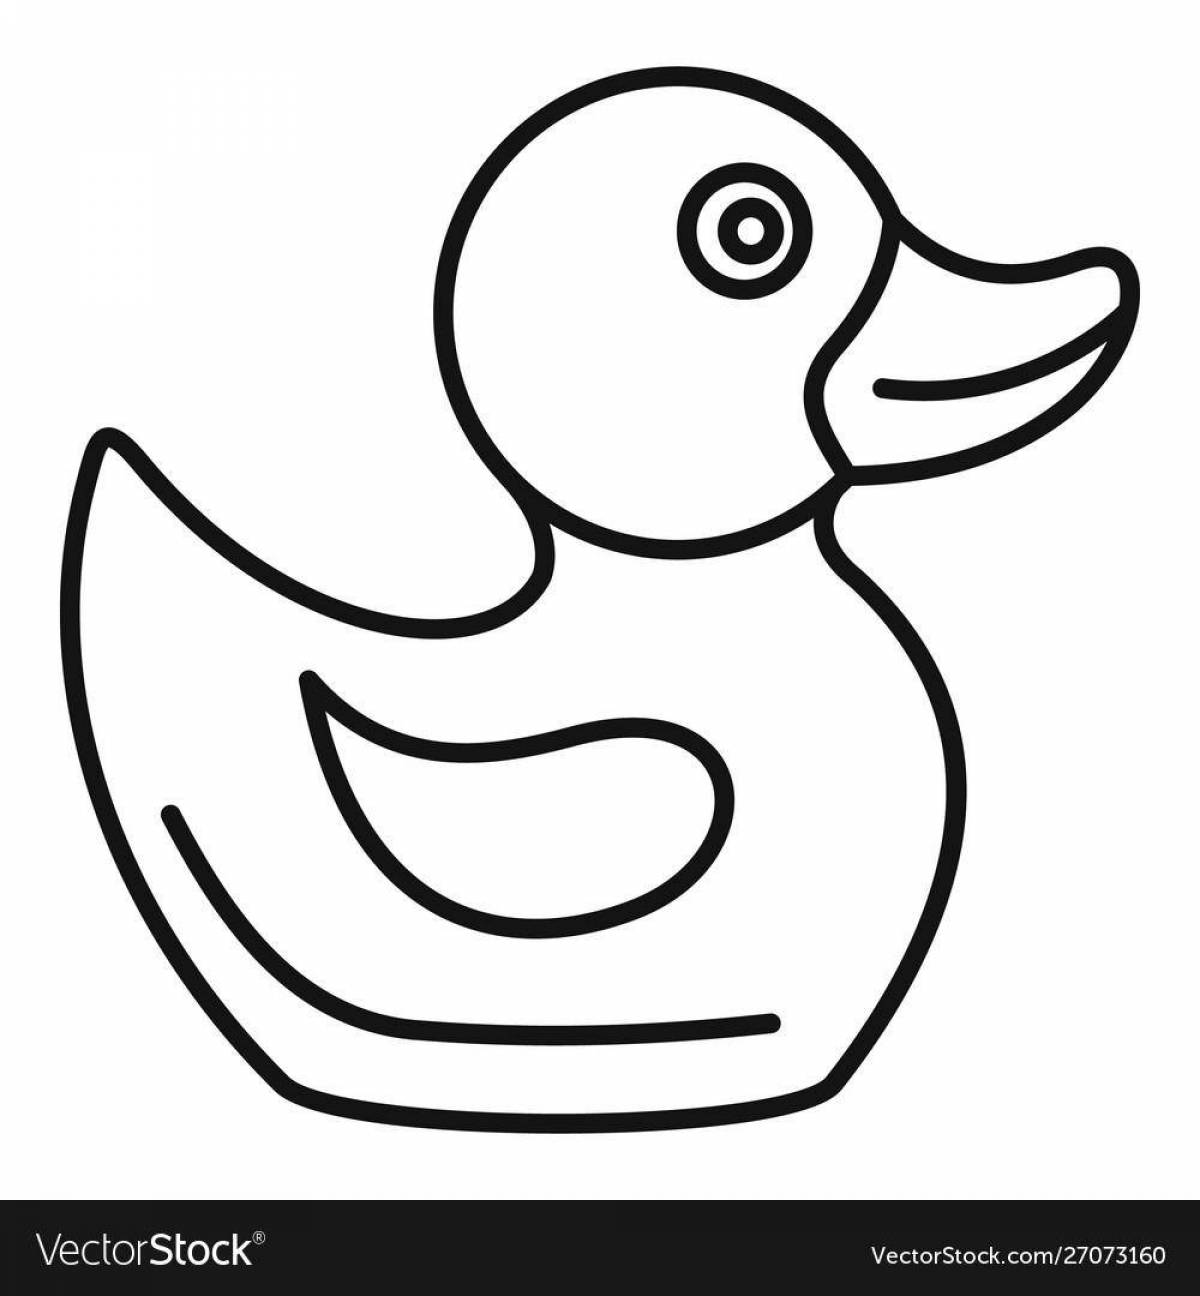 Coloring page grinning rubber duck